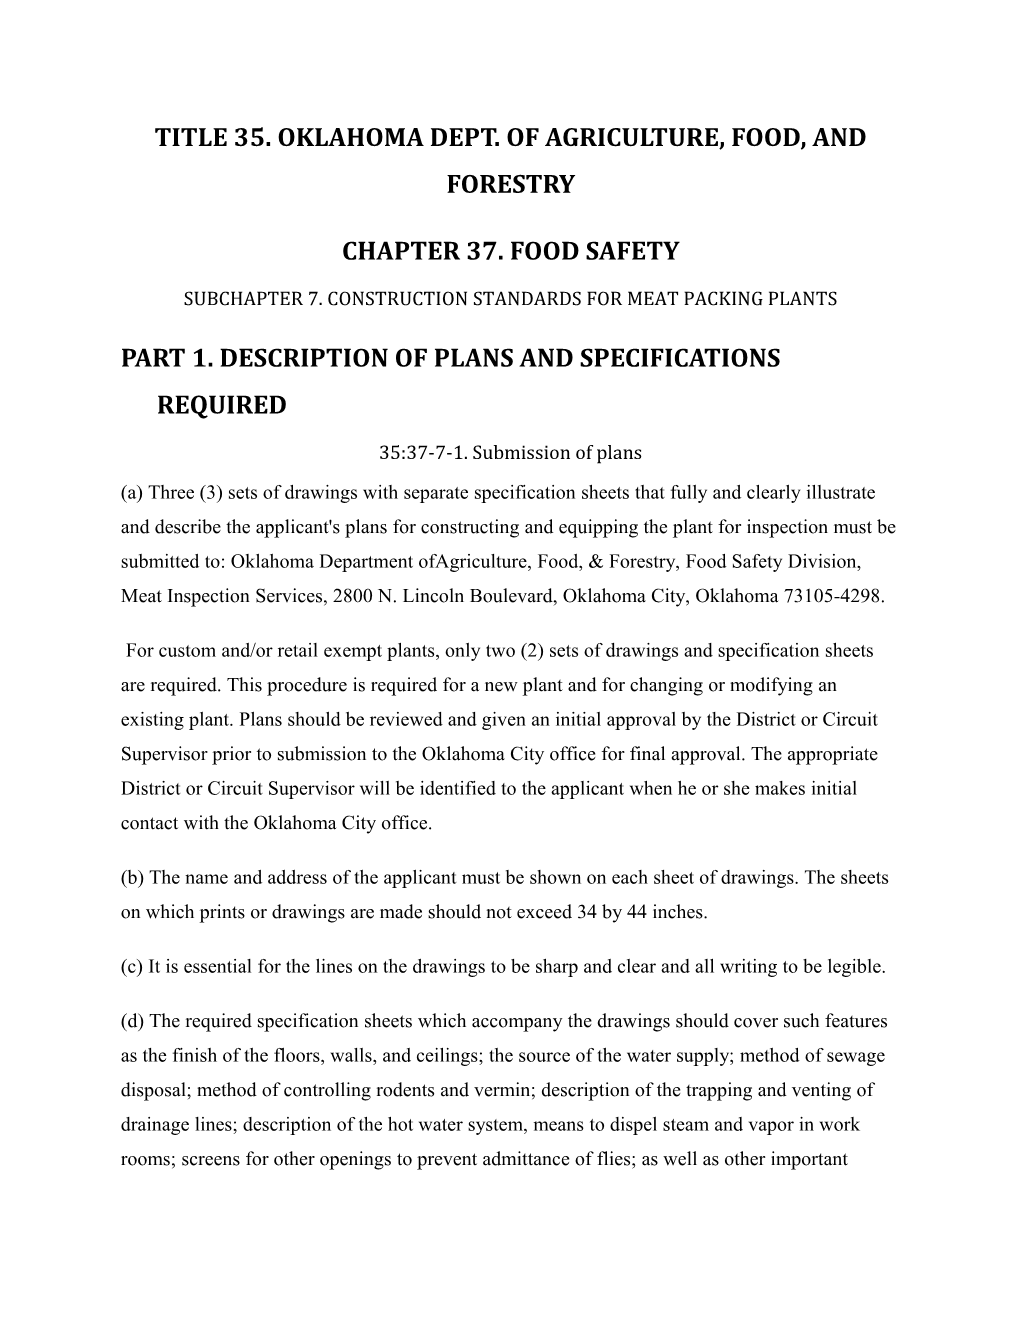 Food Safety Rules, Title 35, Chapter 37, Subsection 7 s1